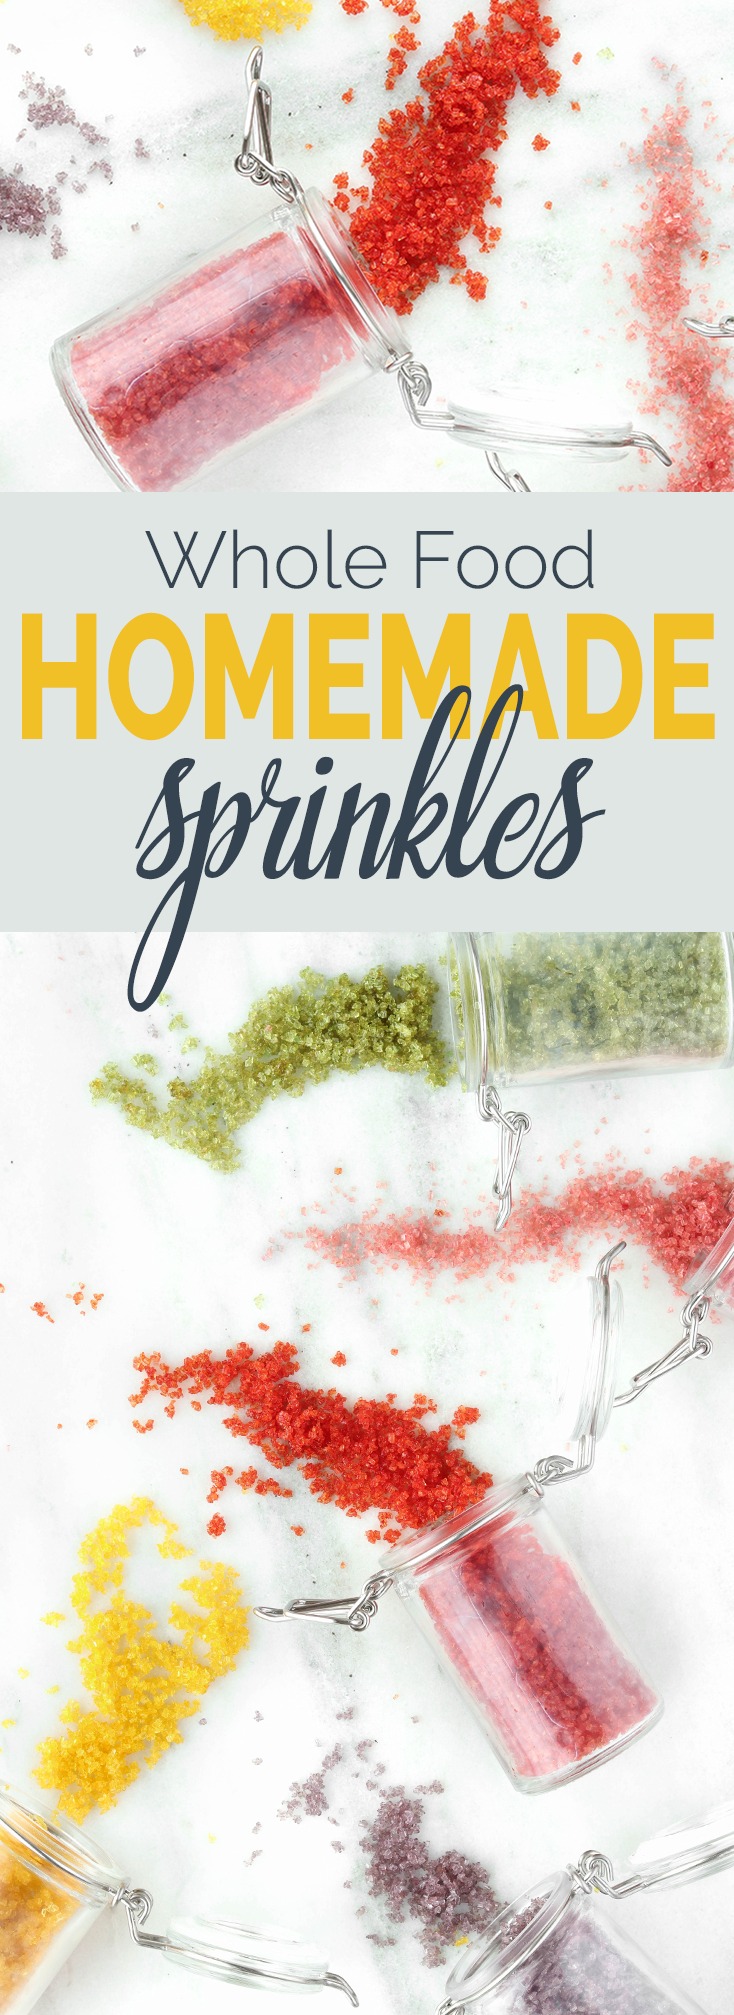 Homemade Whole Food Sprinkles are simple to make, requiring just 2 ingredients and about 5 minutes prep time. Skip the junky additives and chemicals and go all natural, nobody will even notice. Promise.